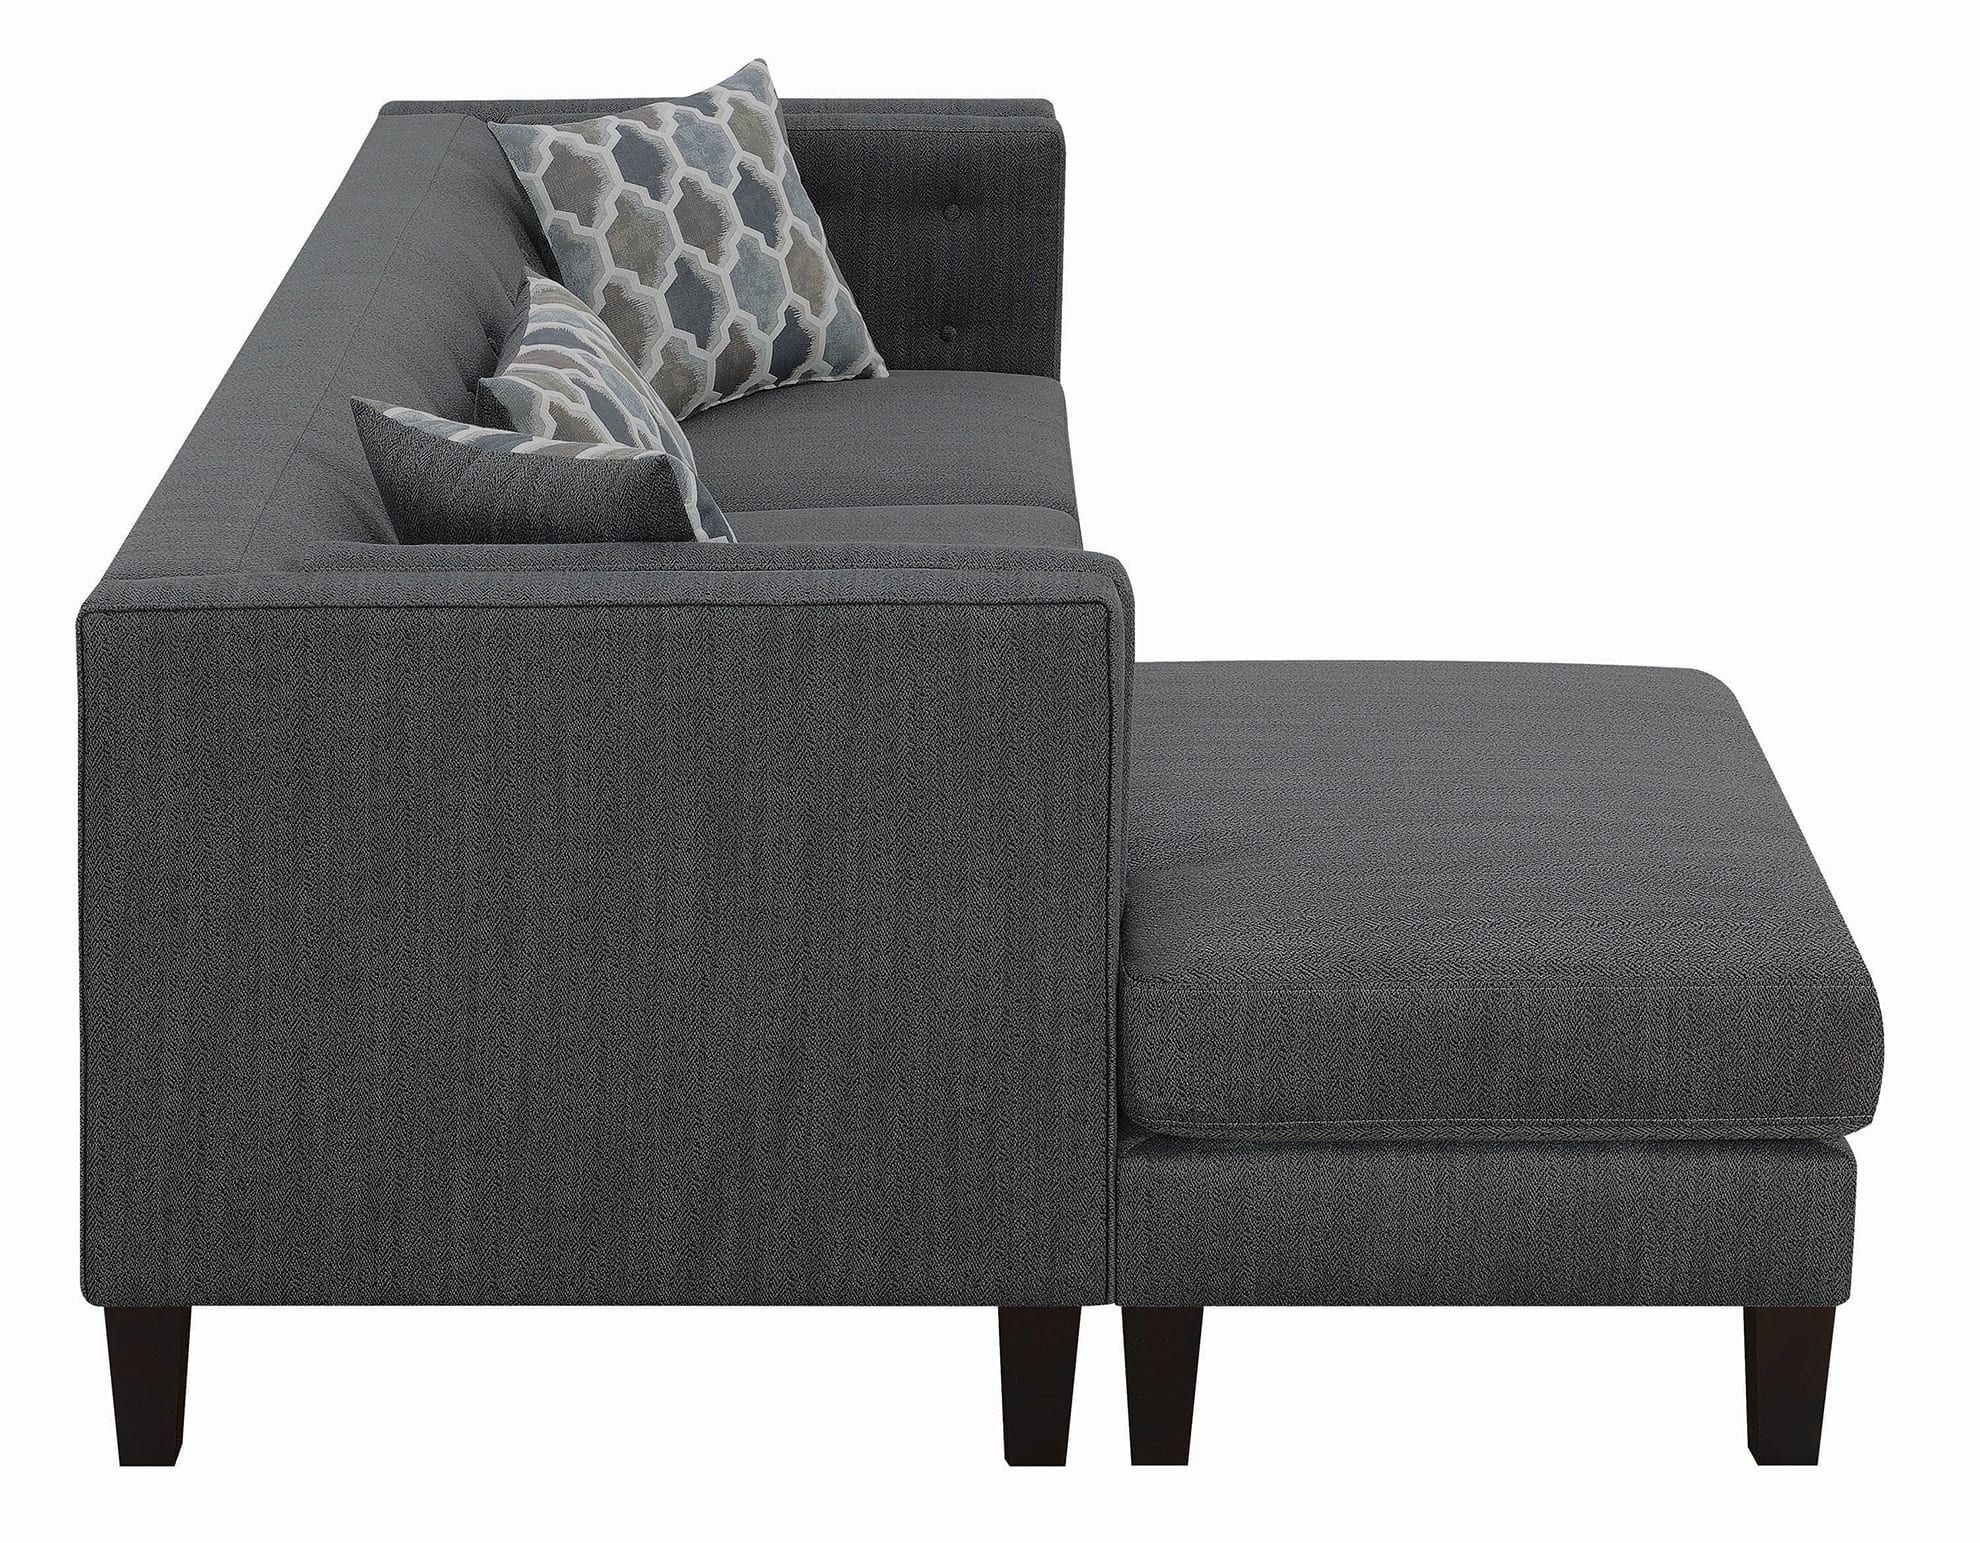 Sawyer Contemporary Dusty Blue Sectional | Quality Regarding Brayson Chaise Sectional Sofas Dusty Blue (View 4 of 15)